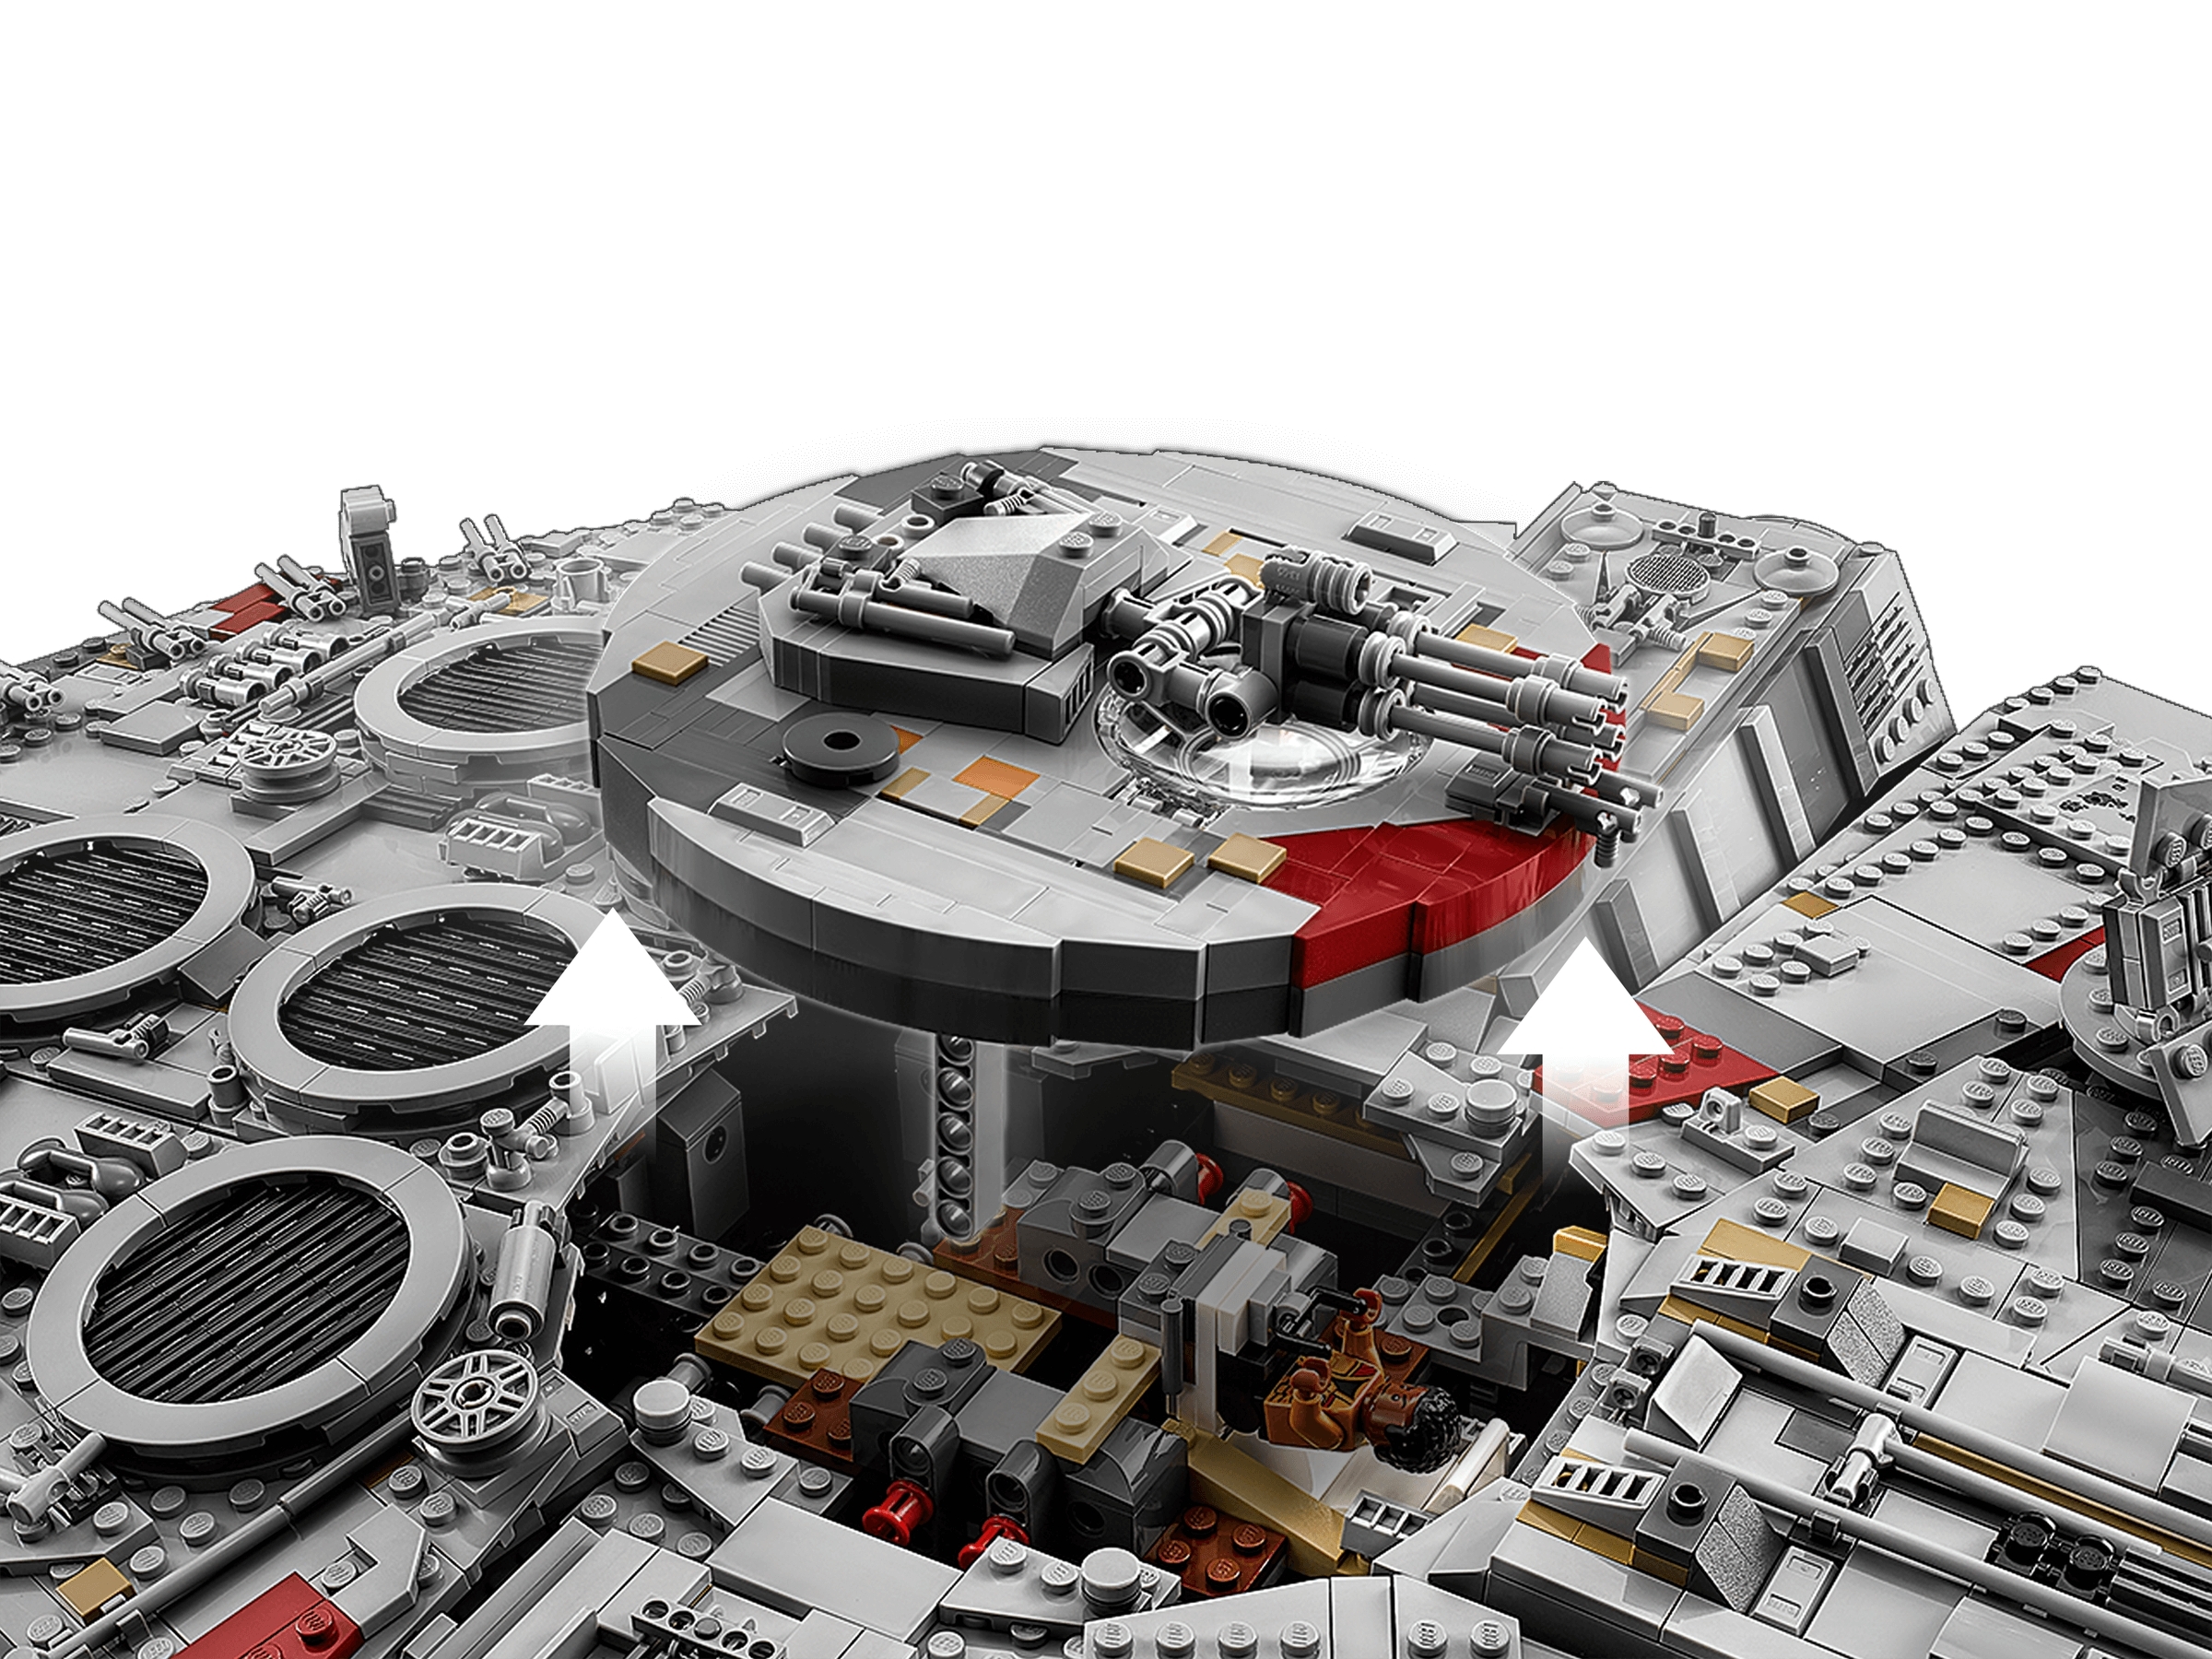 UCS Millennium Falcon, 2nd Edition. Exactly 16 lbs in weight and